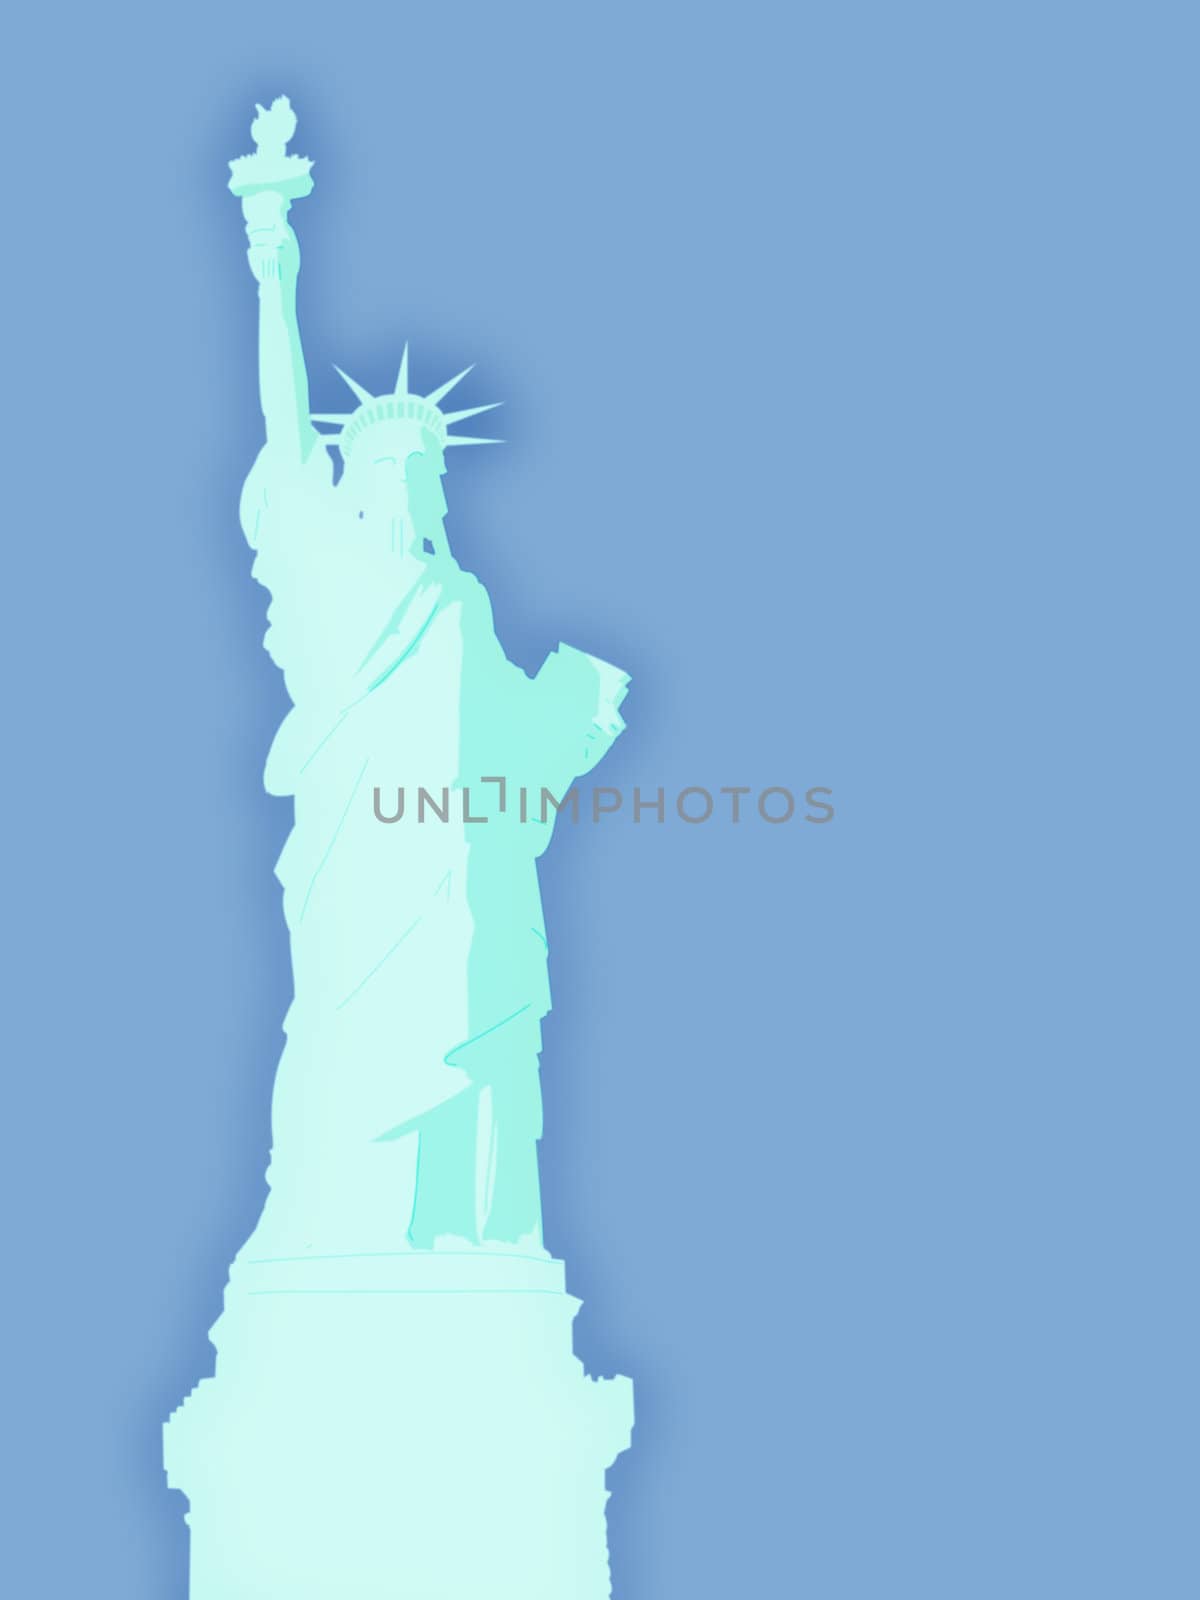 Blue Statue of Liberty Illustration with Sky Background by bobbigmac